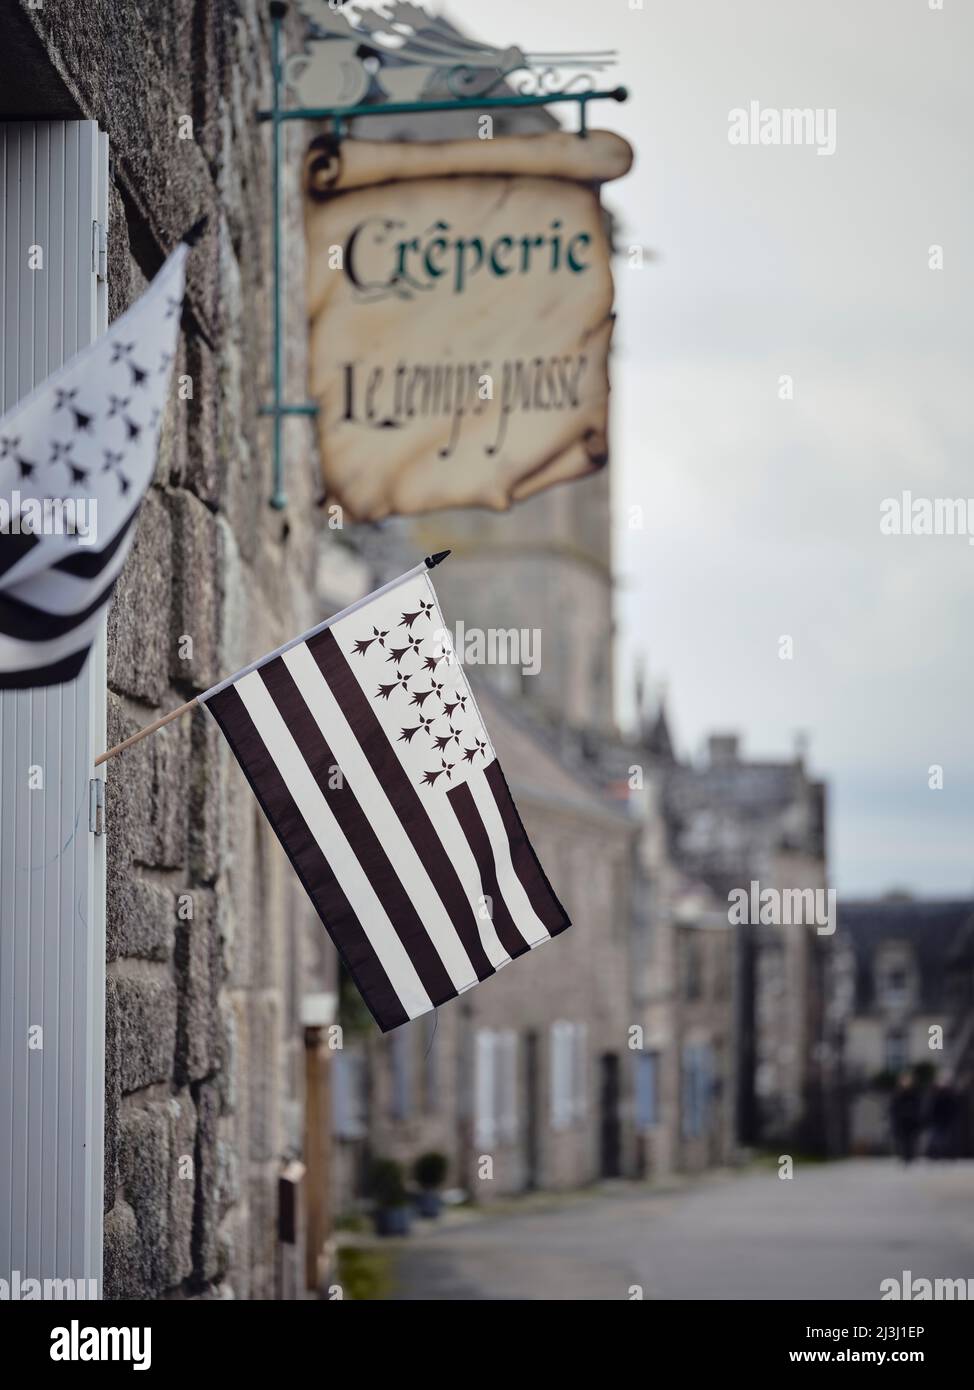 The Breton flag at a crêperie in Locronan in the department of Finistère in Brittany. The cottages were built of granite and date back to the 17th century. Locronan's historic setting has been featured in many film and television productions. Locronan is a popular destination for excursions. Stock Photo